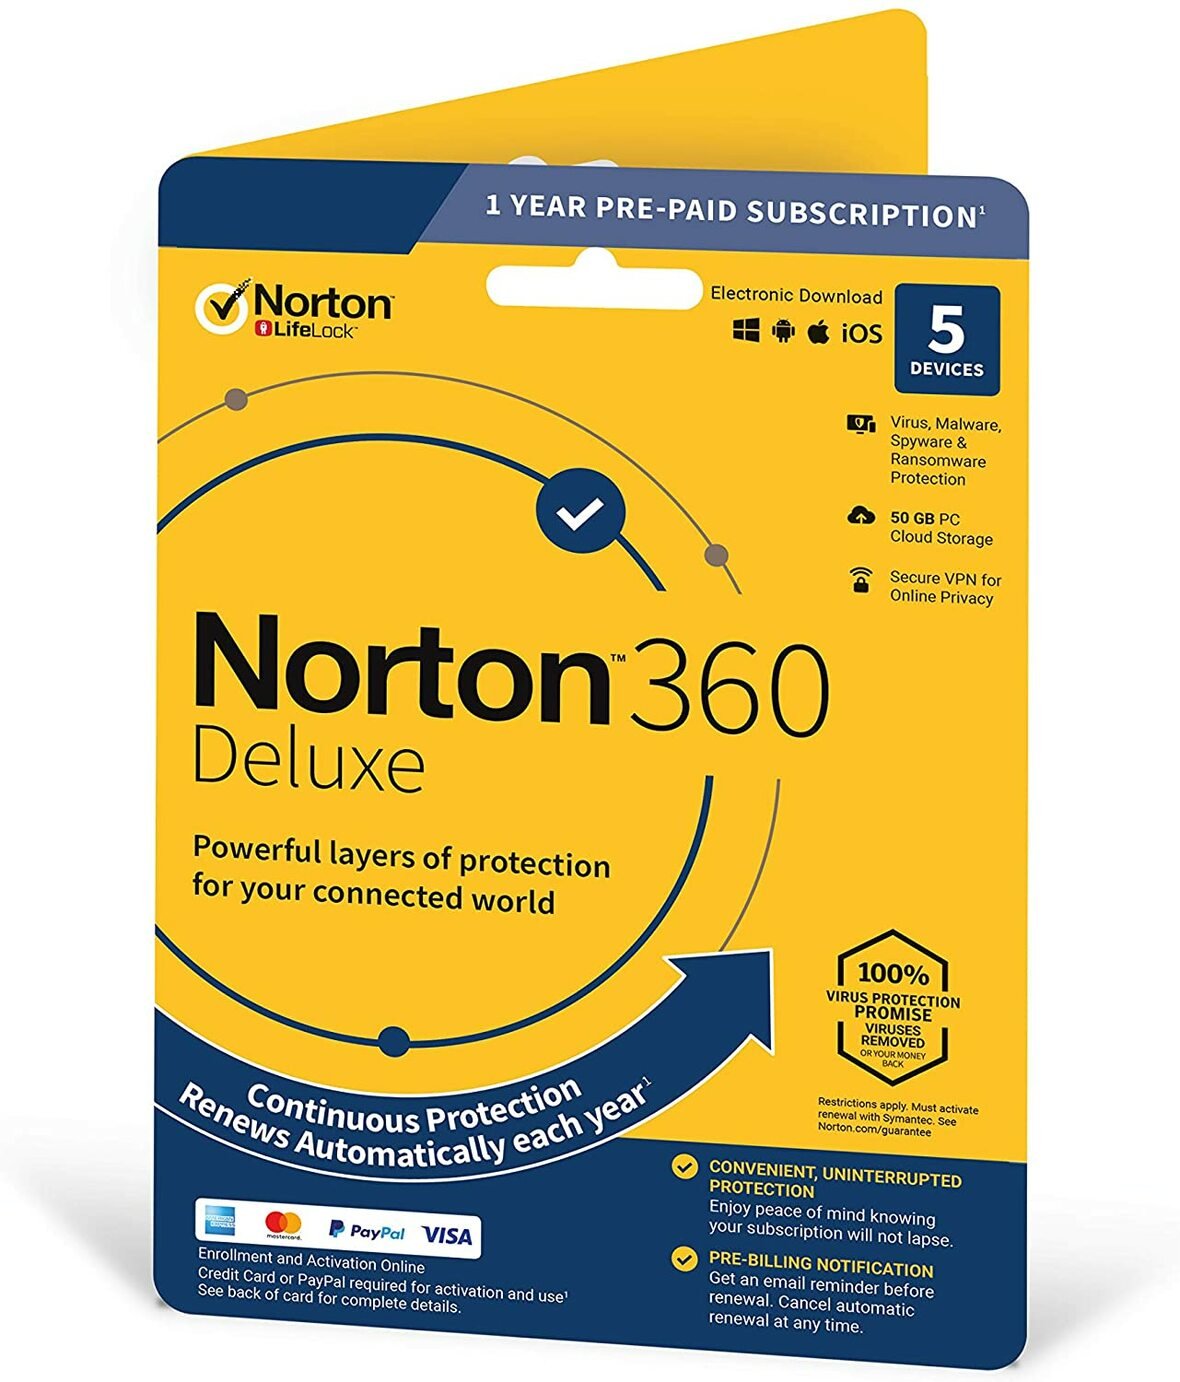 Norton 360 Deluxe Protection Review